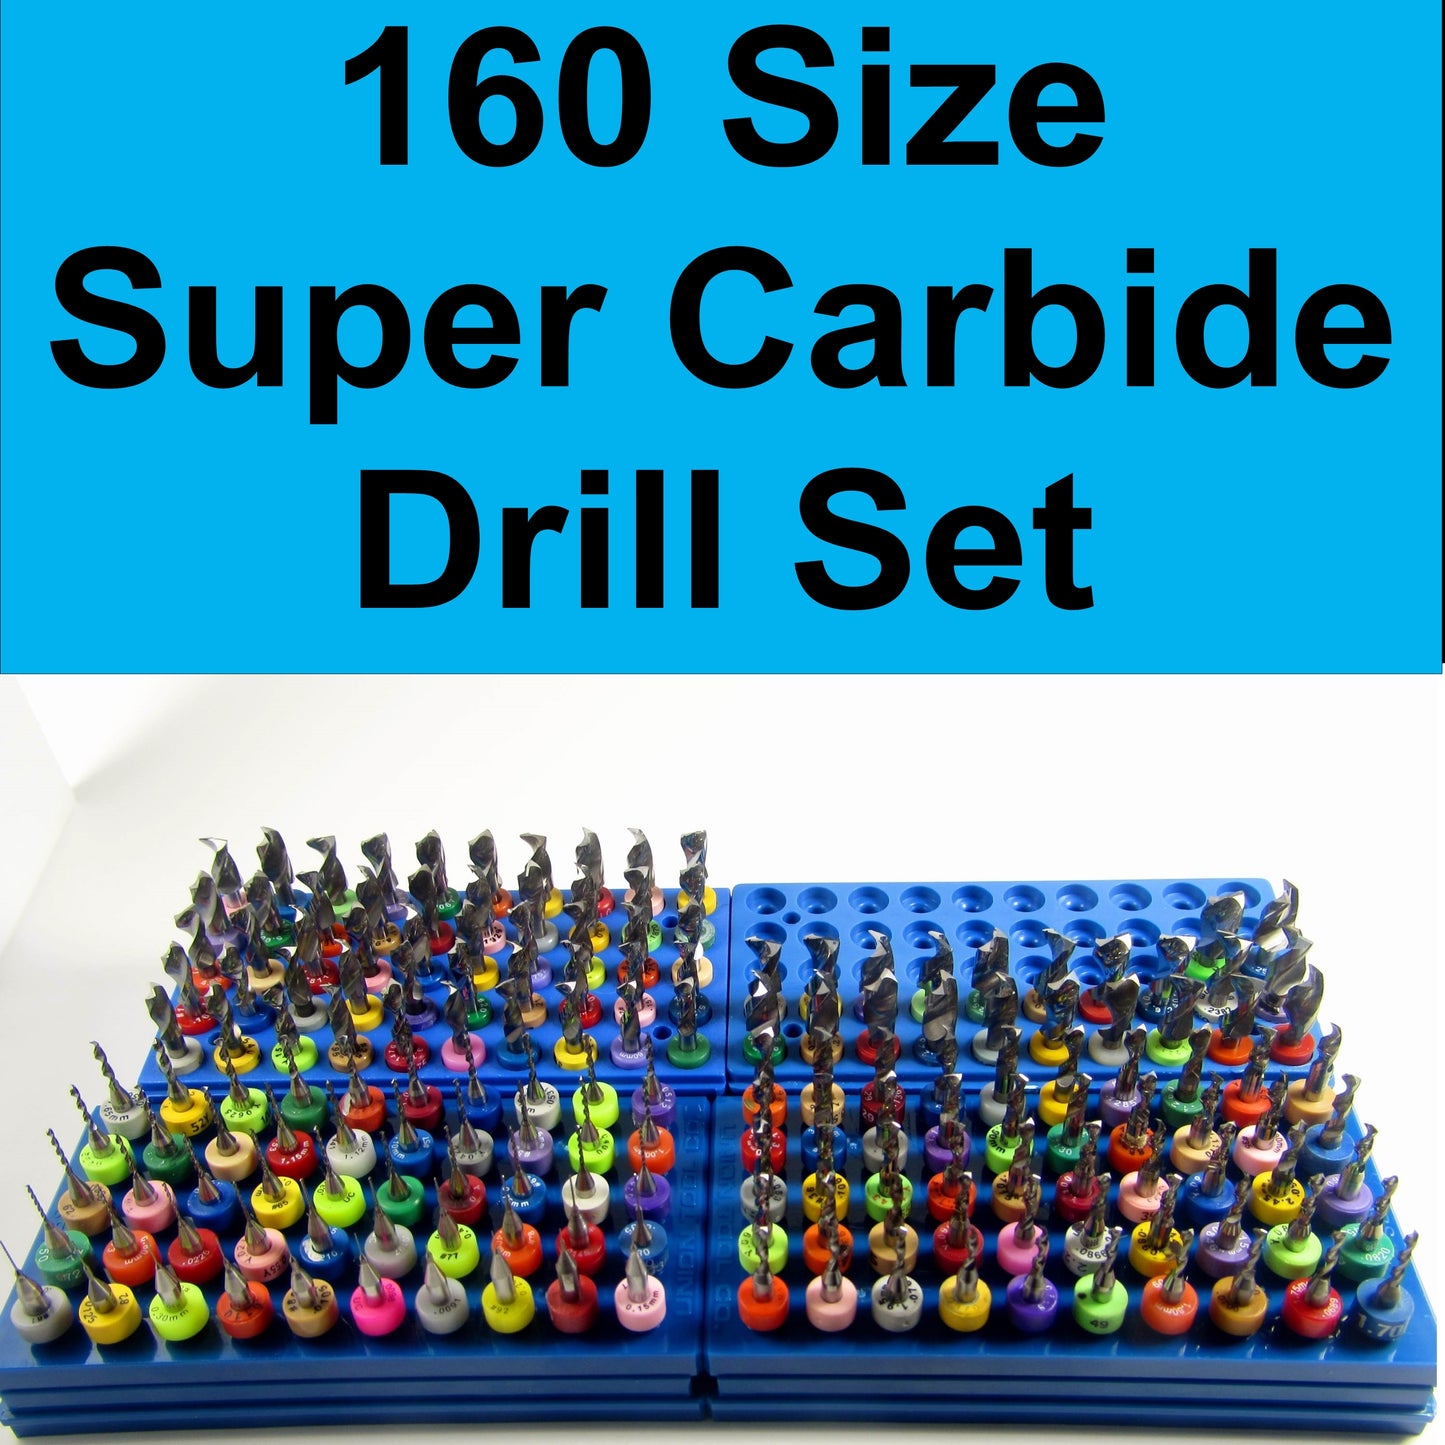 Carbide Drill Bit Set - 160 Sizes!  From .006" to 1/4" - 1/8" Shafts Super Value!